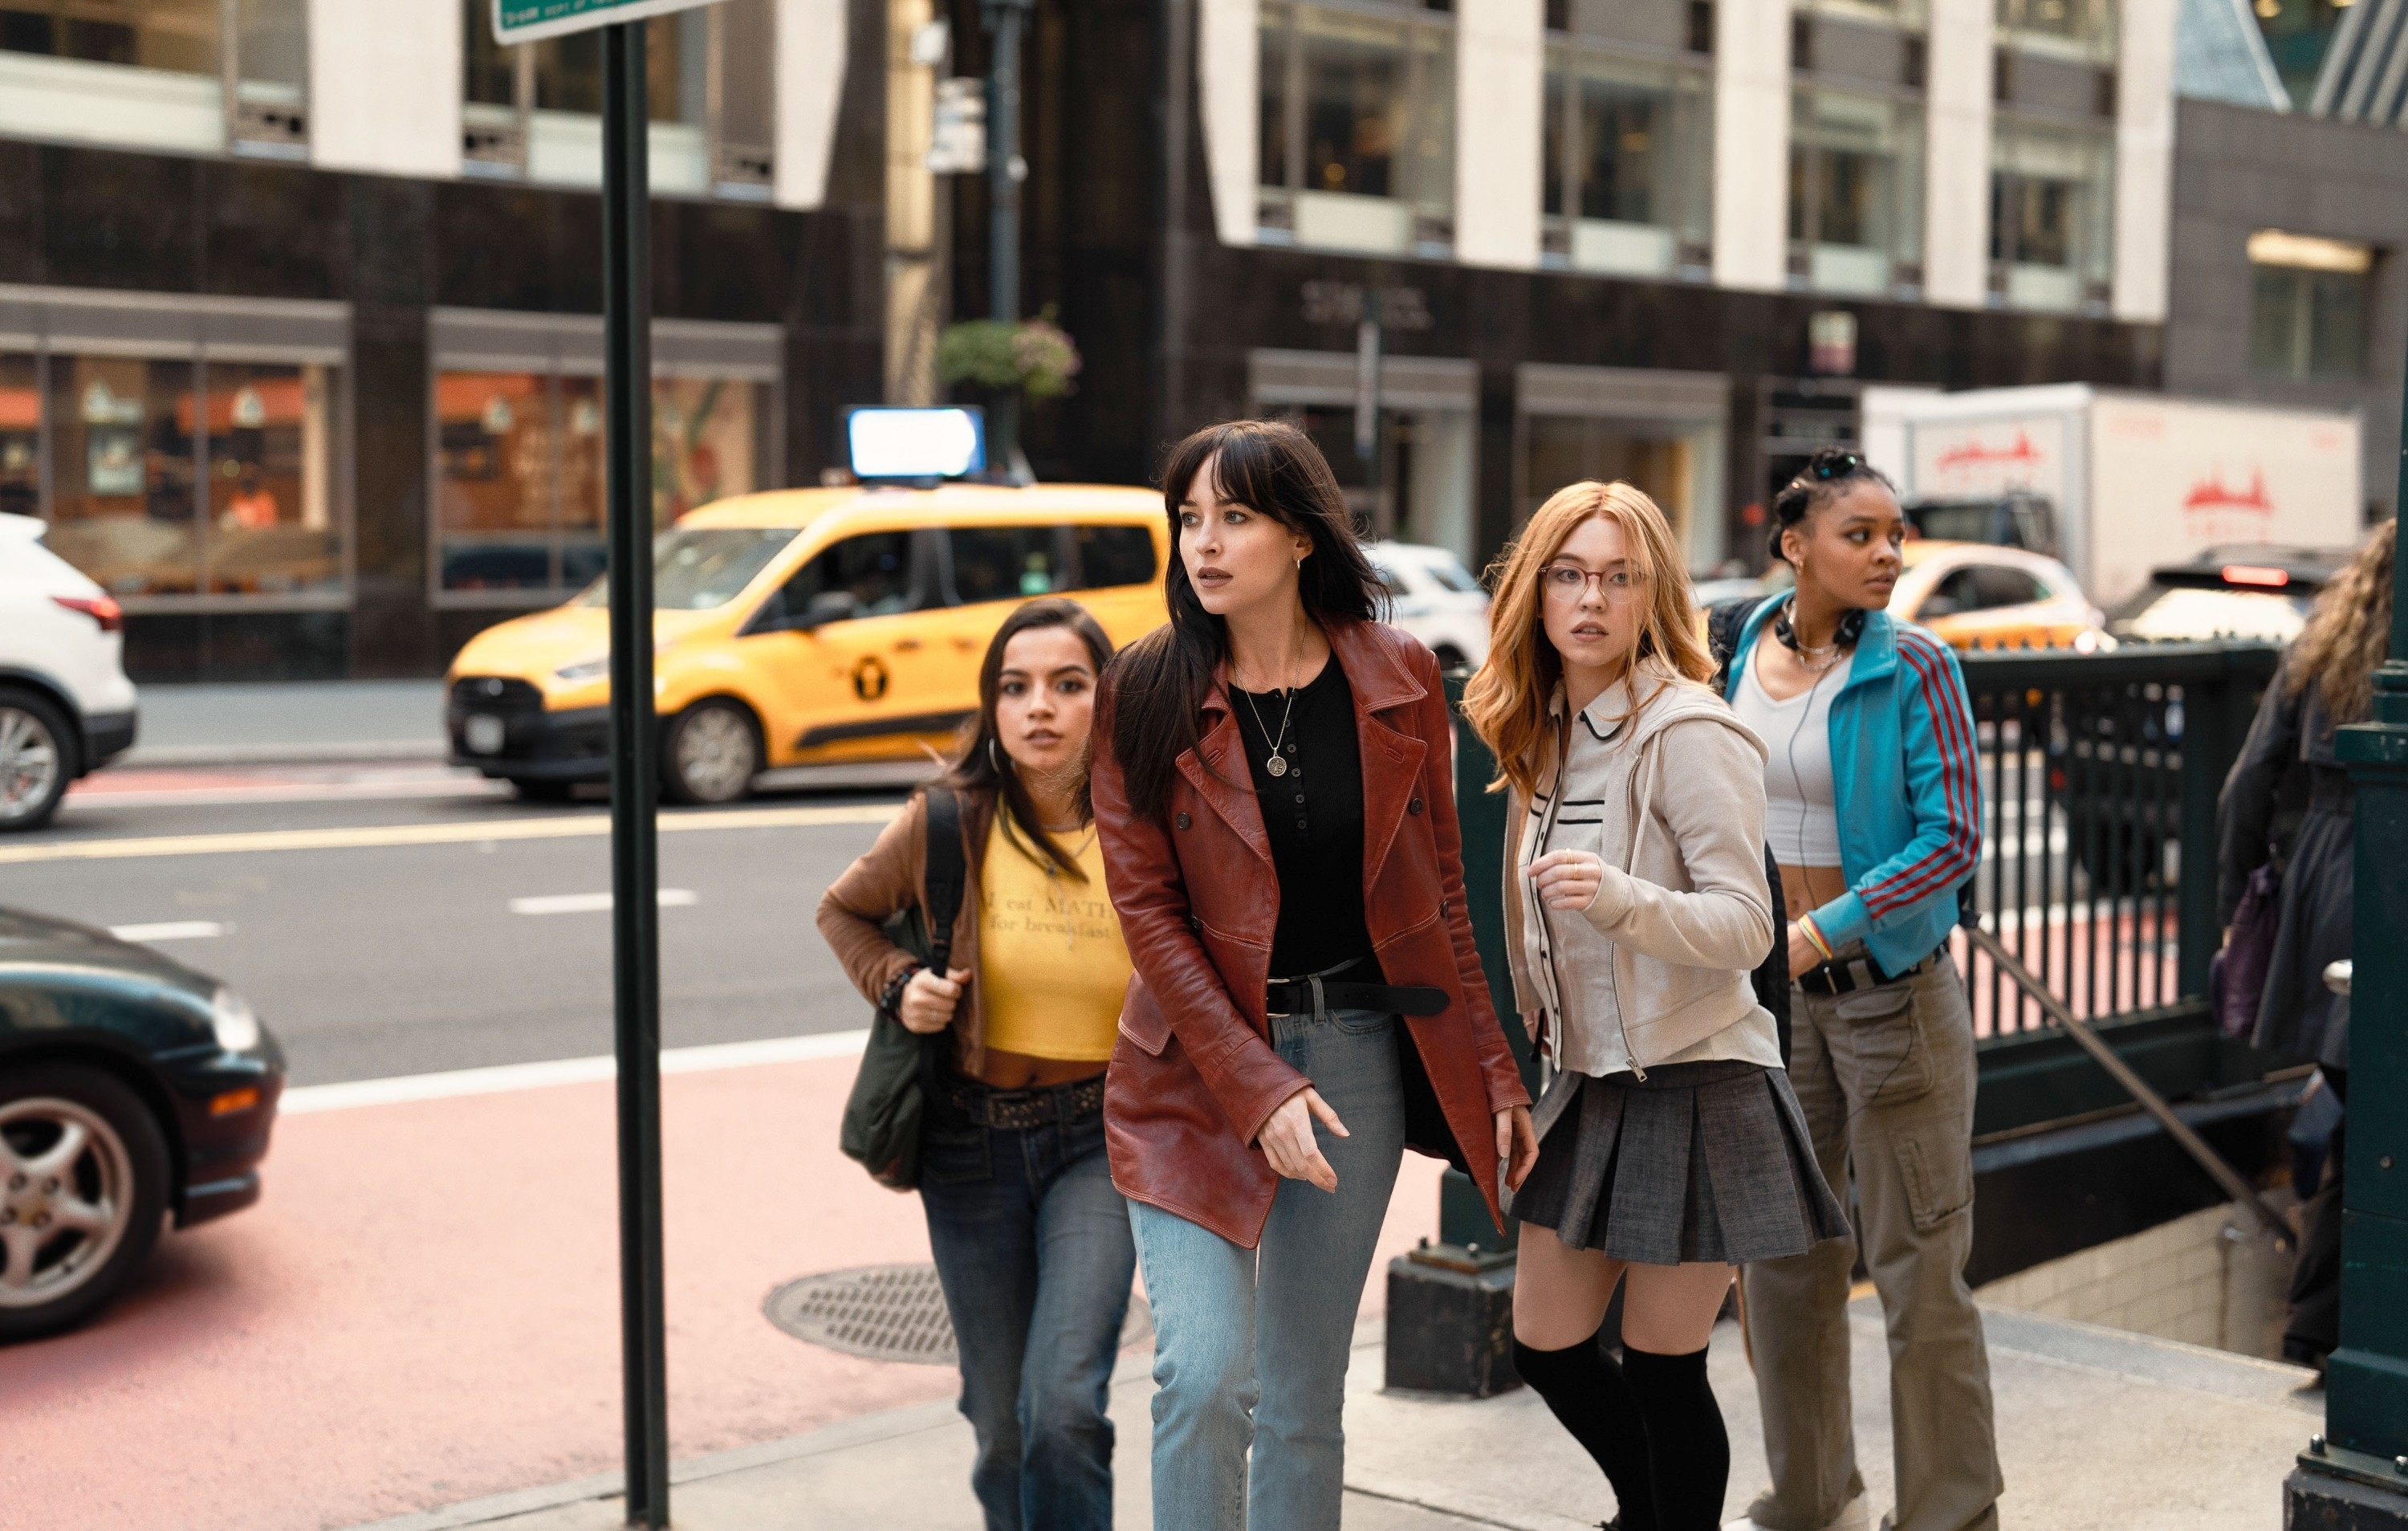 the four leads walking on a city street, dressed in casual attire